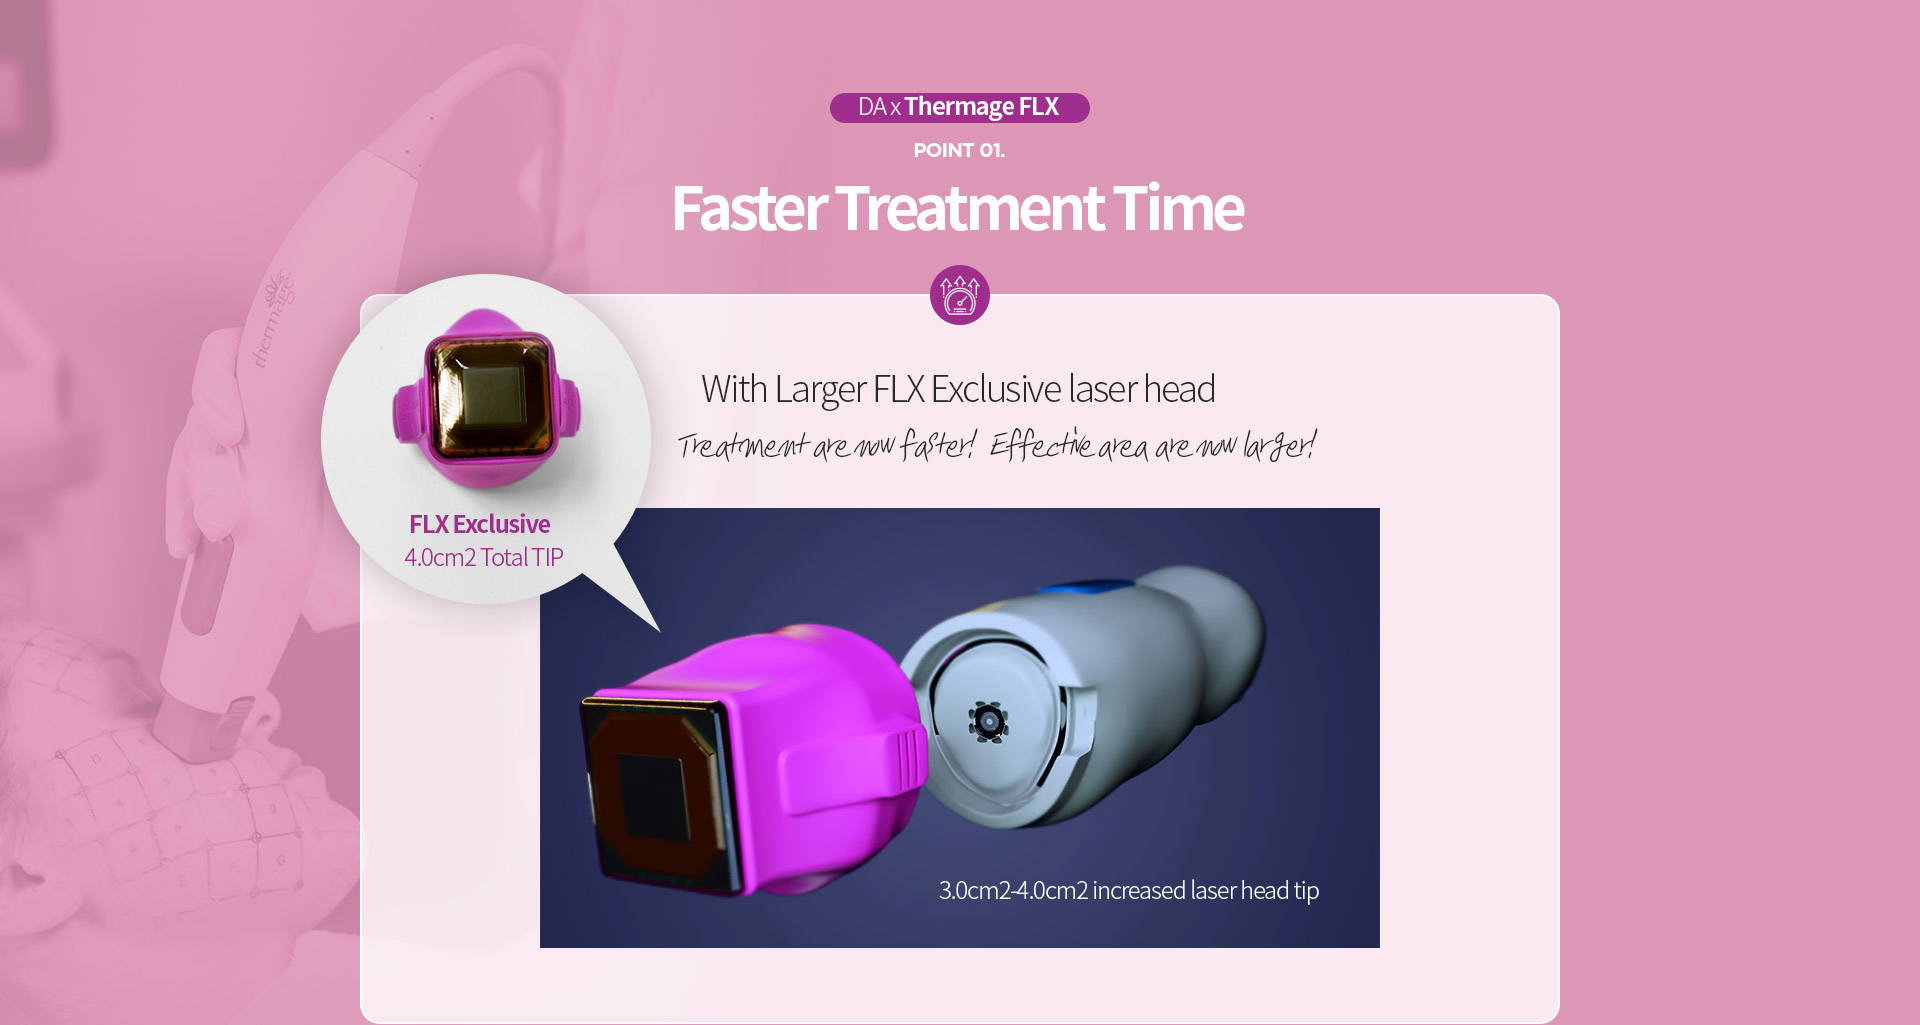 DA Thermage FLX, point01. Faster Treatment Time